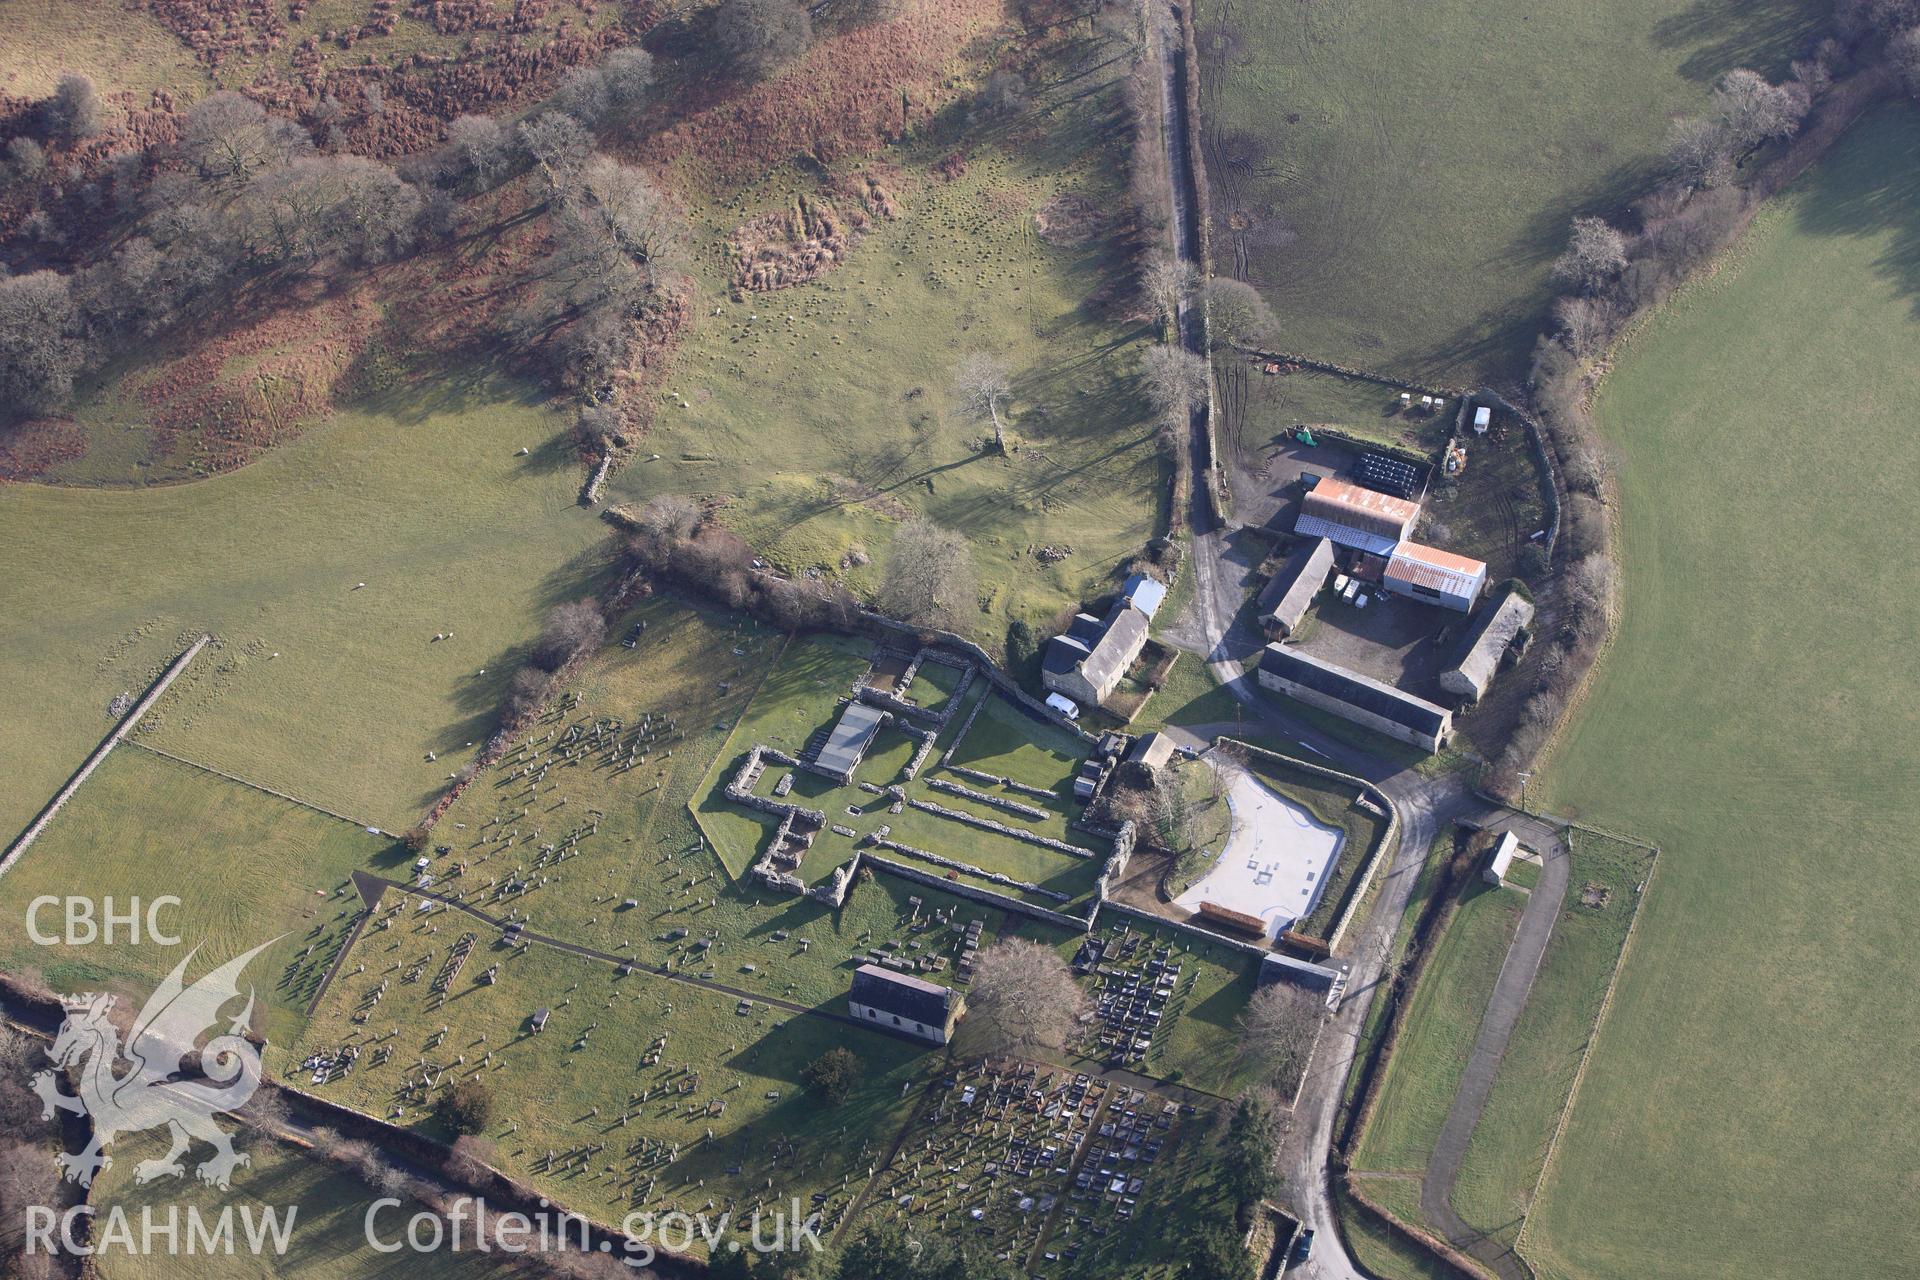 RCAHMW colour oblique photograph of Strata Florida Abbey, View from North. Taken by Toby Driver on 07/02/2012.